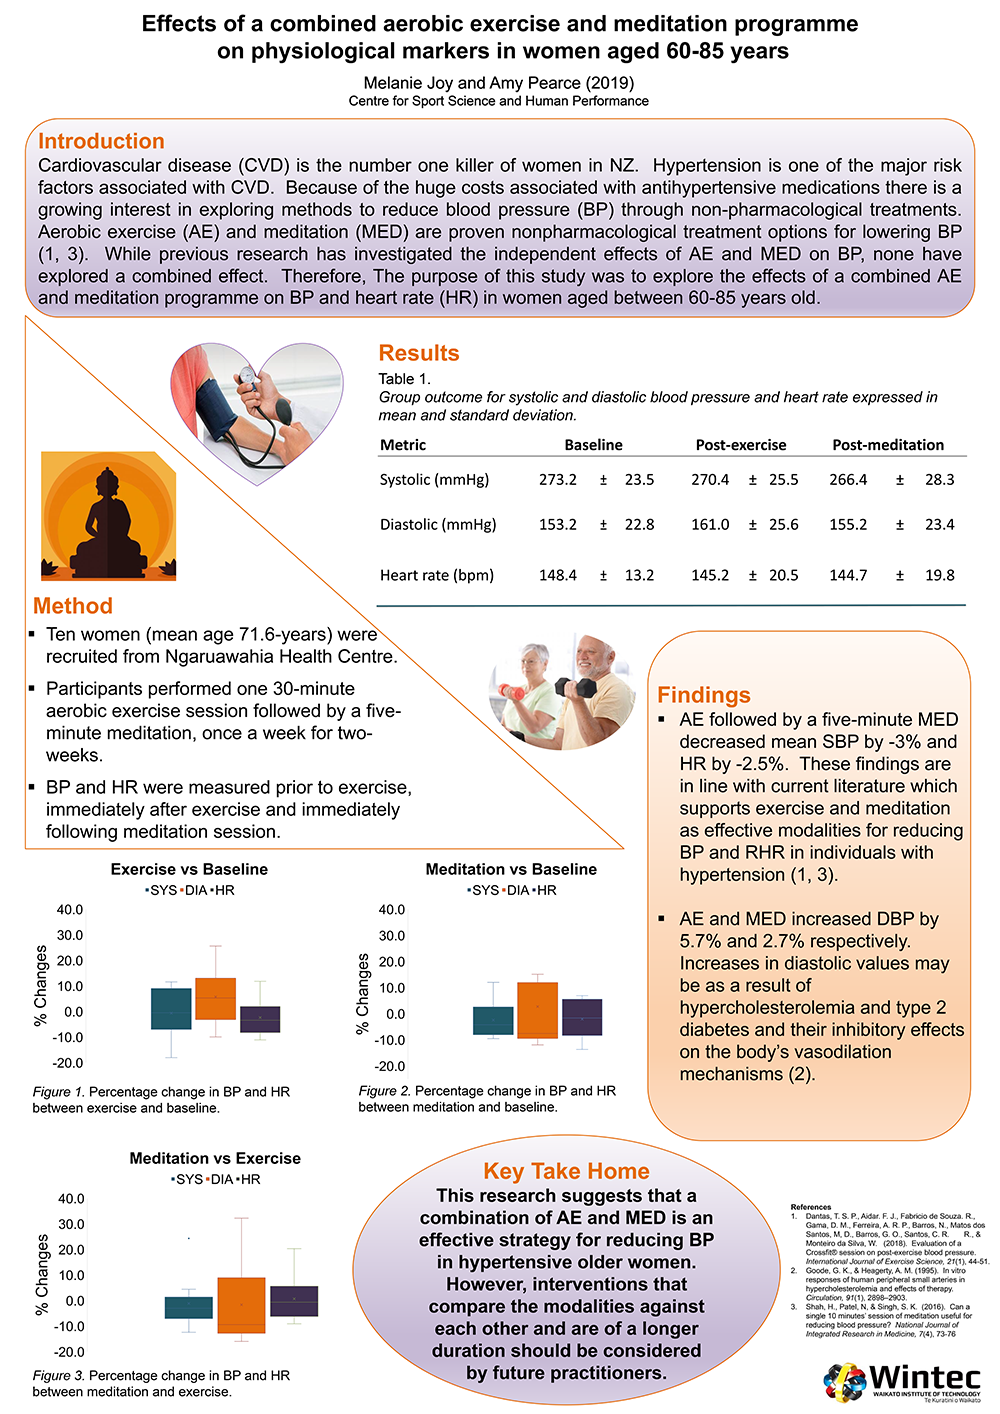 Effects of a combined aerobic exercise and meditation programme on physiological markers in women aged 60-85 year